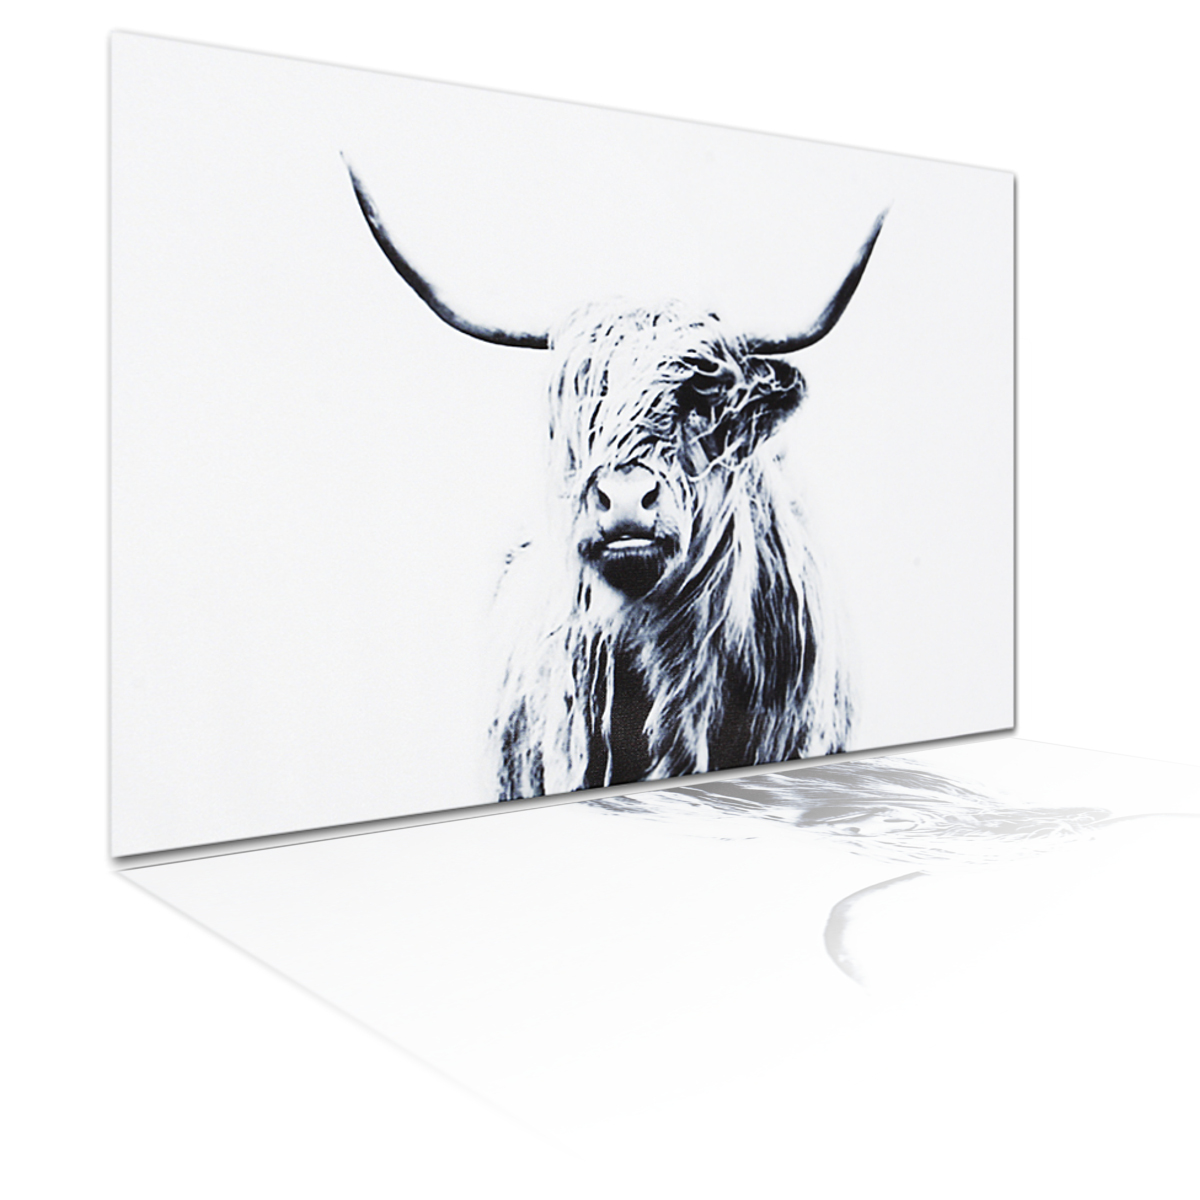 1-Piece-Highland-Cattle-Canvas-Painting-Wall-Decorative-Print-Art-Pictures-Frameless-Wall-Hanging-De-1733254-2